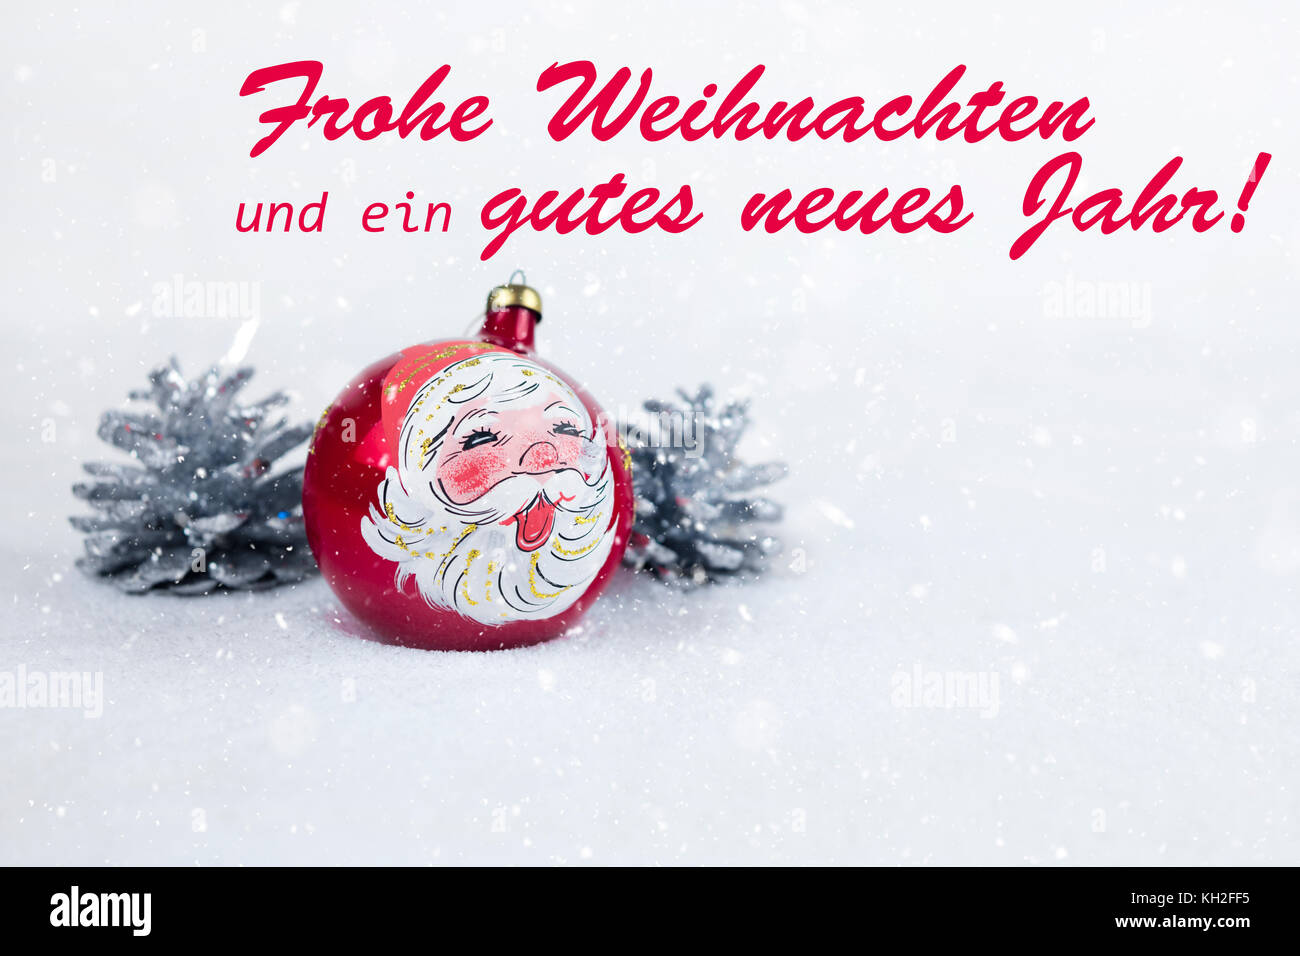 Group of colorful Christmas ball with drawing of Santa Claus and pines with text in German 'Frohe Weihnachten und ein gutes neues Jahr' in white snow  Stock Photo